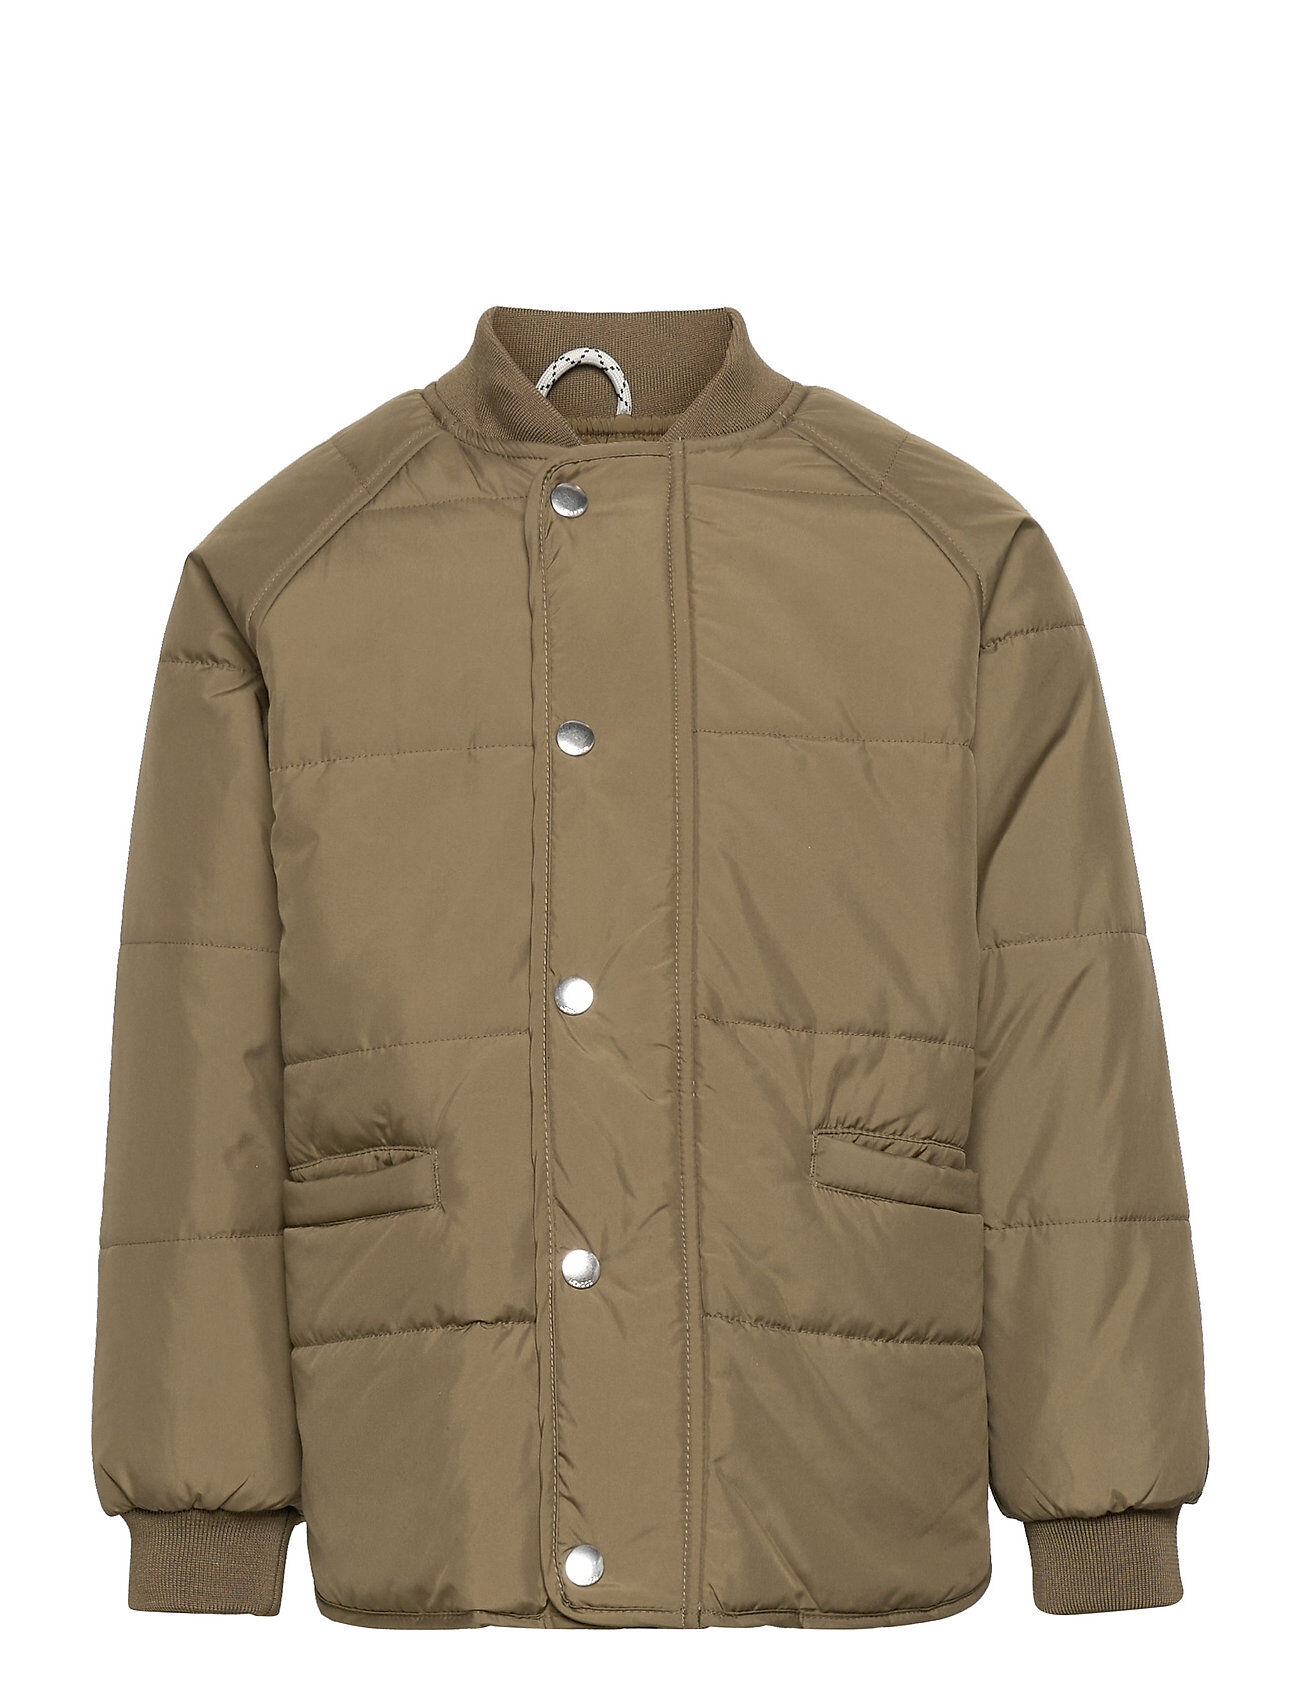 Liewood Kendra Jacket Outerwear Thermo Outerwear Thermo Jackets Grønn Liewood